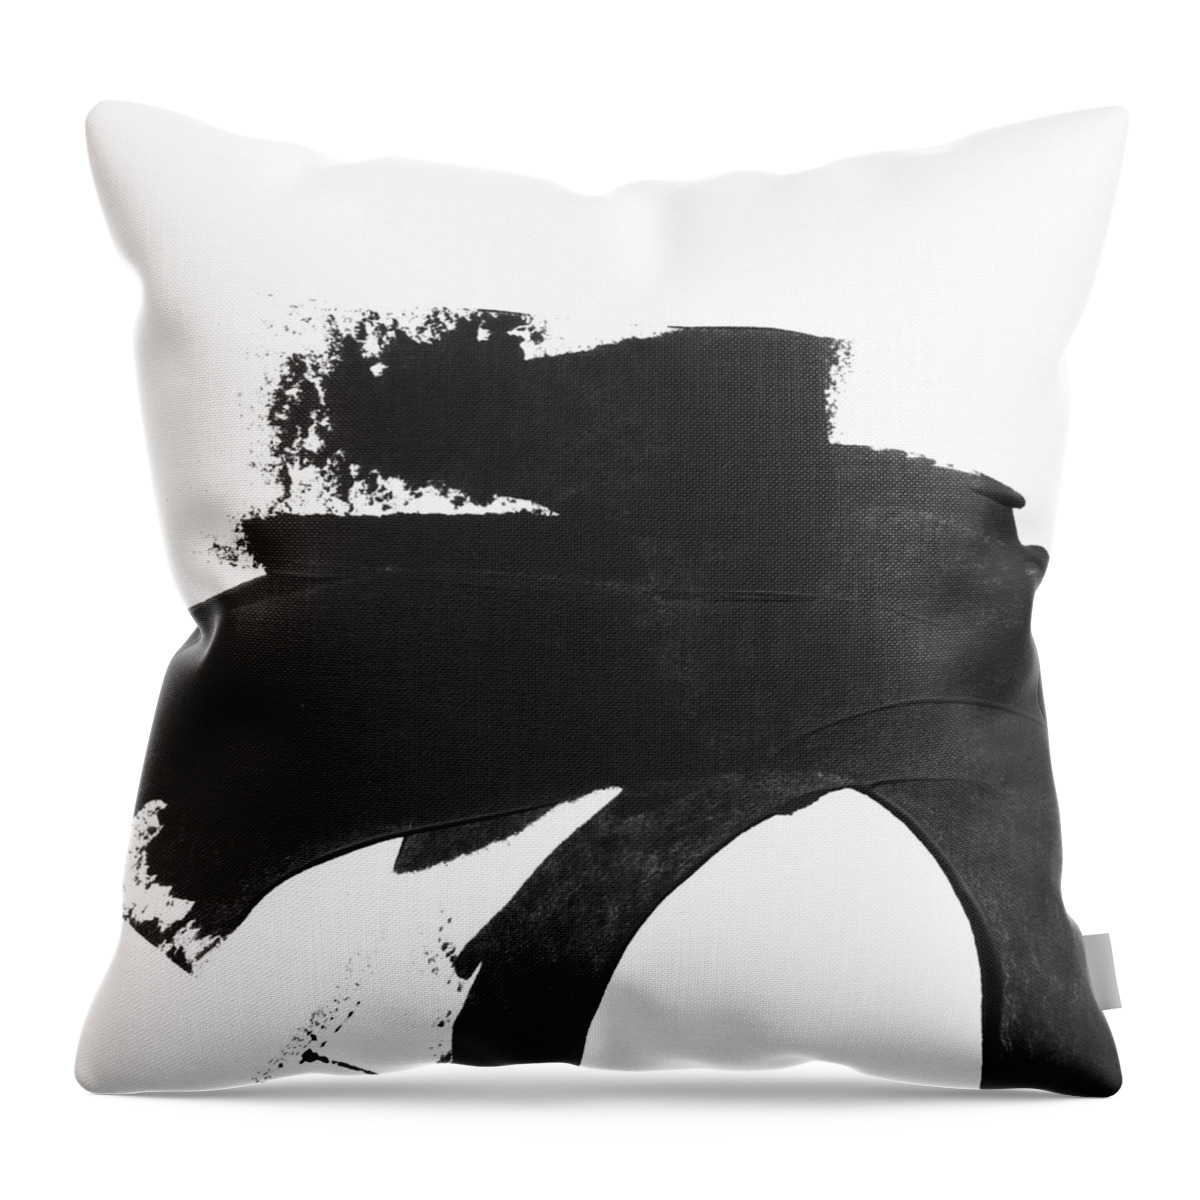 Abstract Throw Pillow featuring the painting Black Brushstroke 4- Art by Linda Woods by Linda Woods